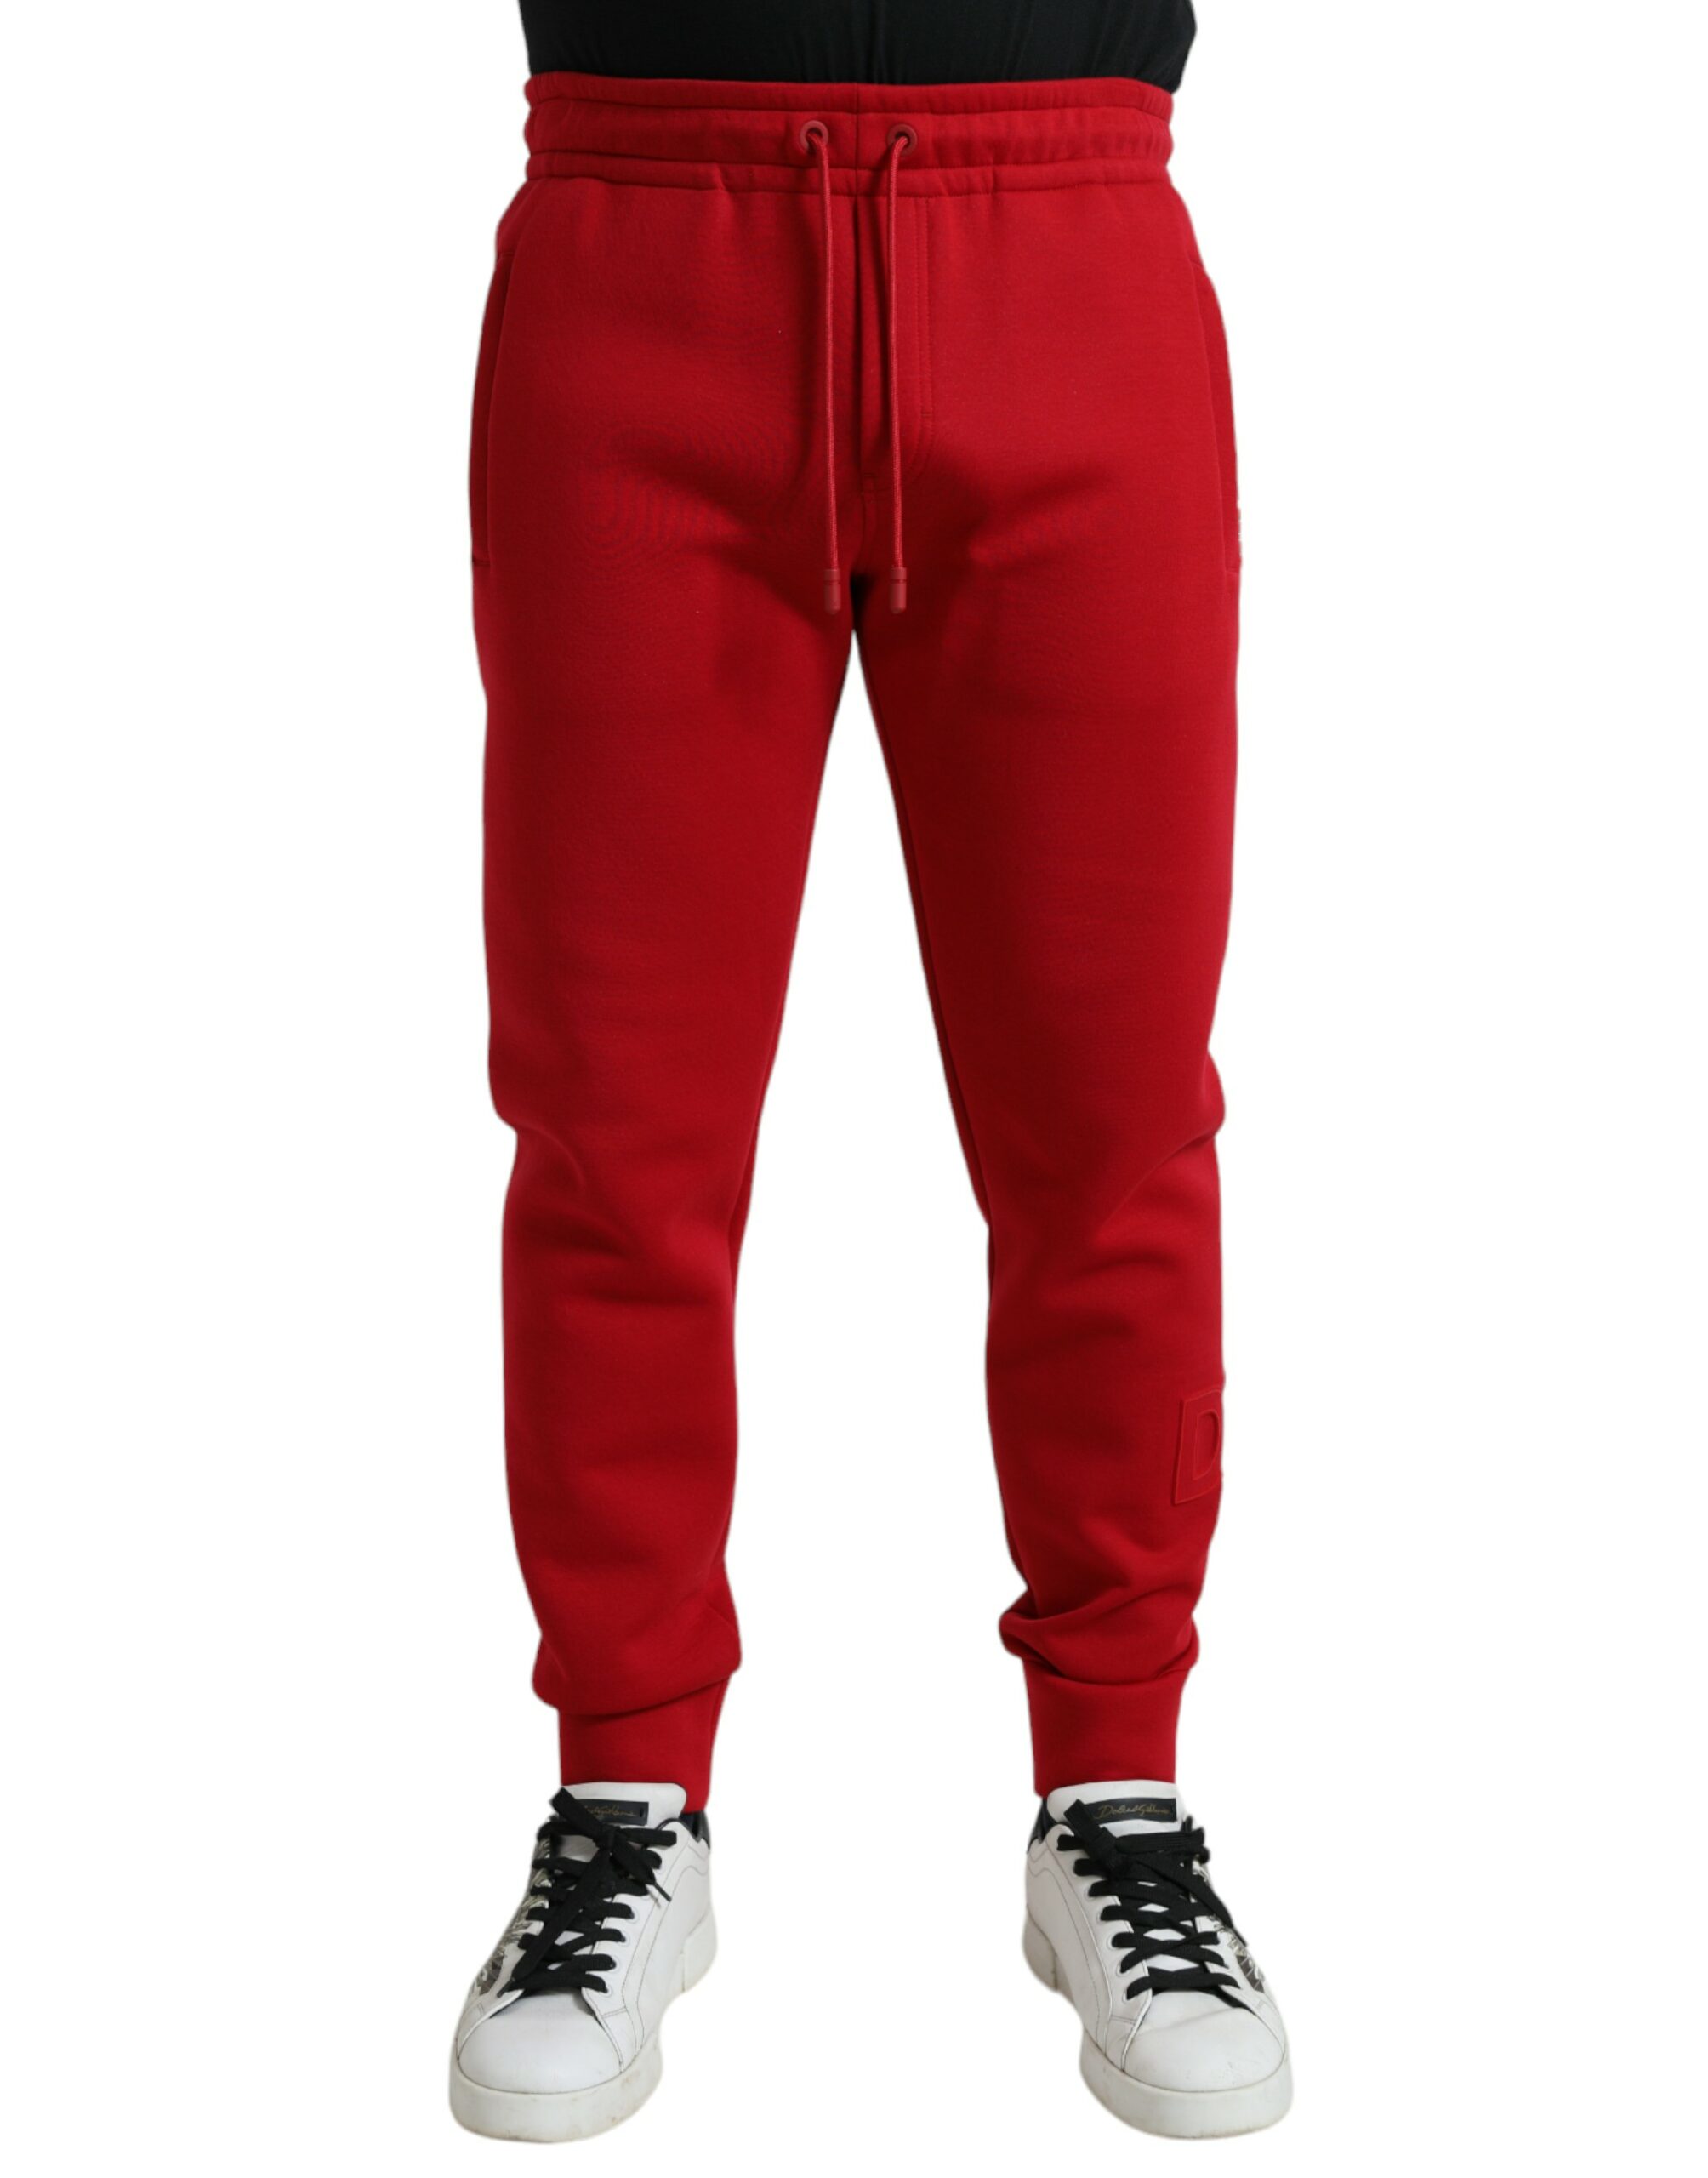 Red Dolce & Gabbana Red Cotton Blend Skinny Jogger Pants